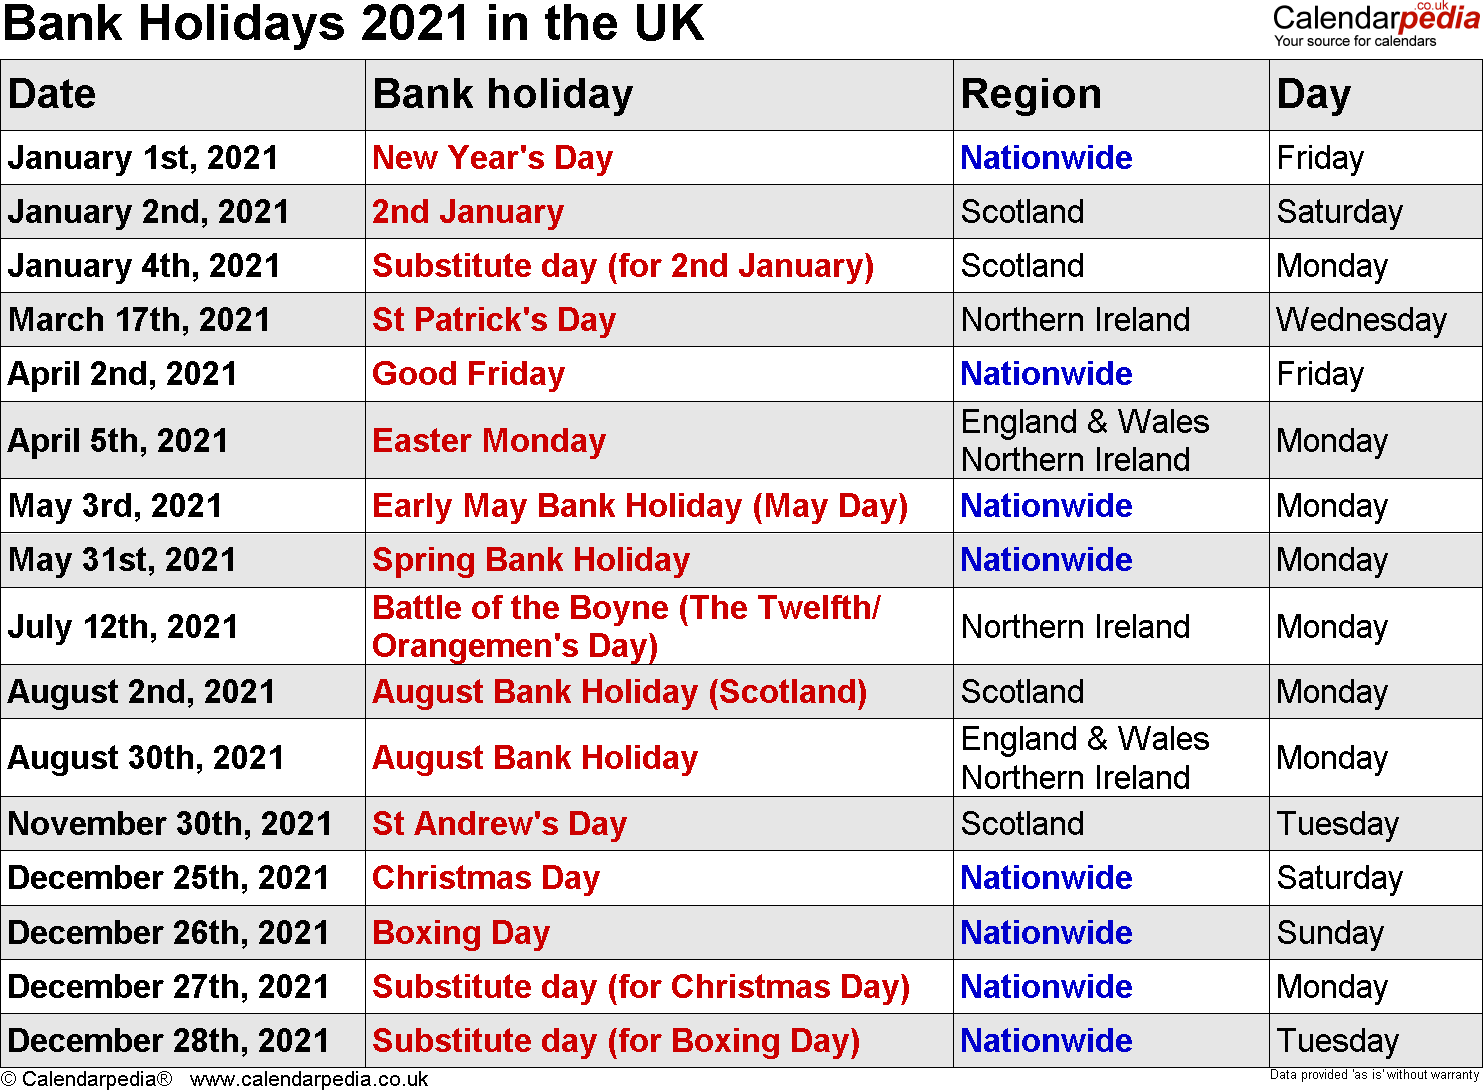 Bank Holidays 2021: When Are They And How To Maximise Days Off